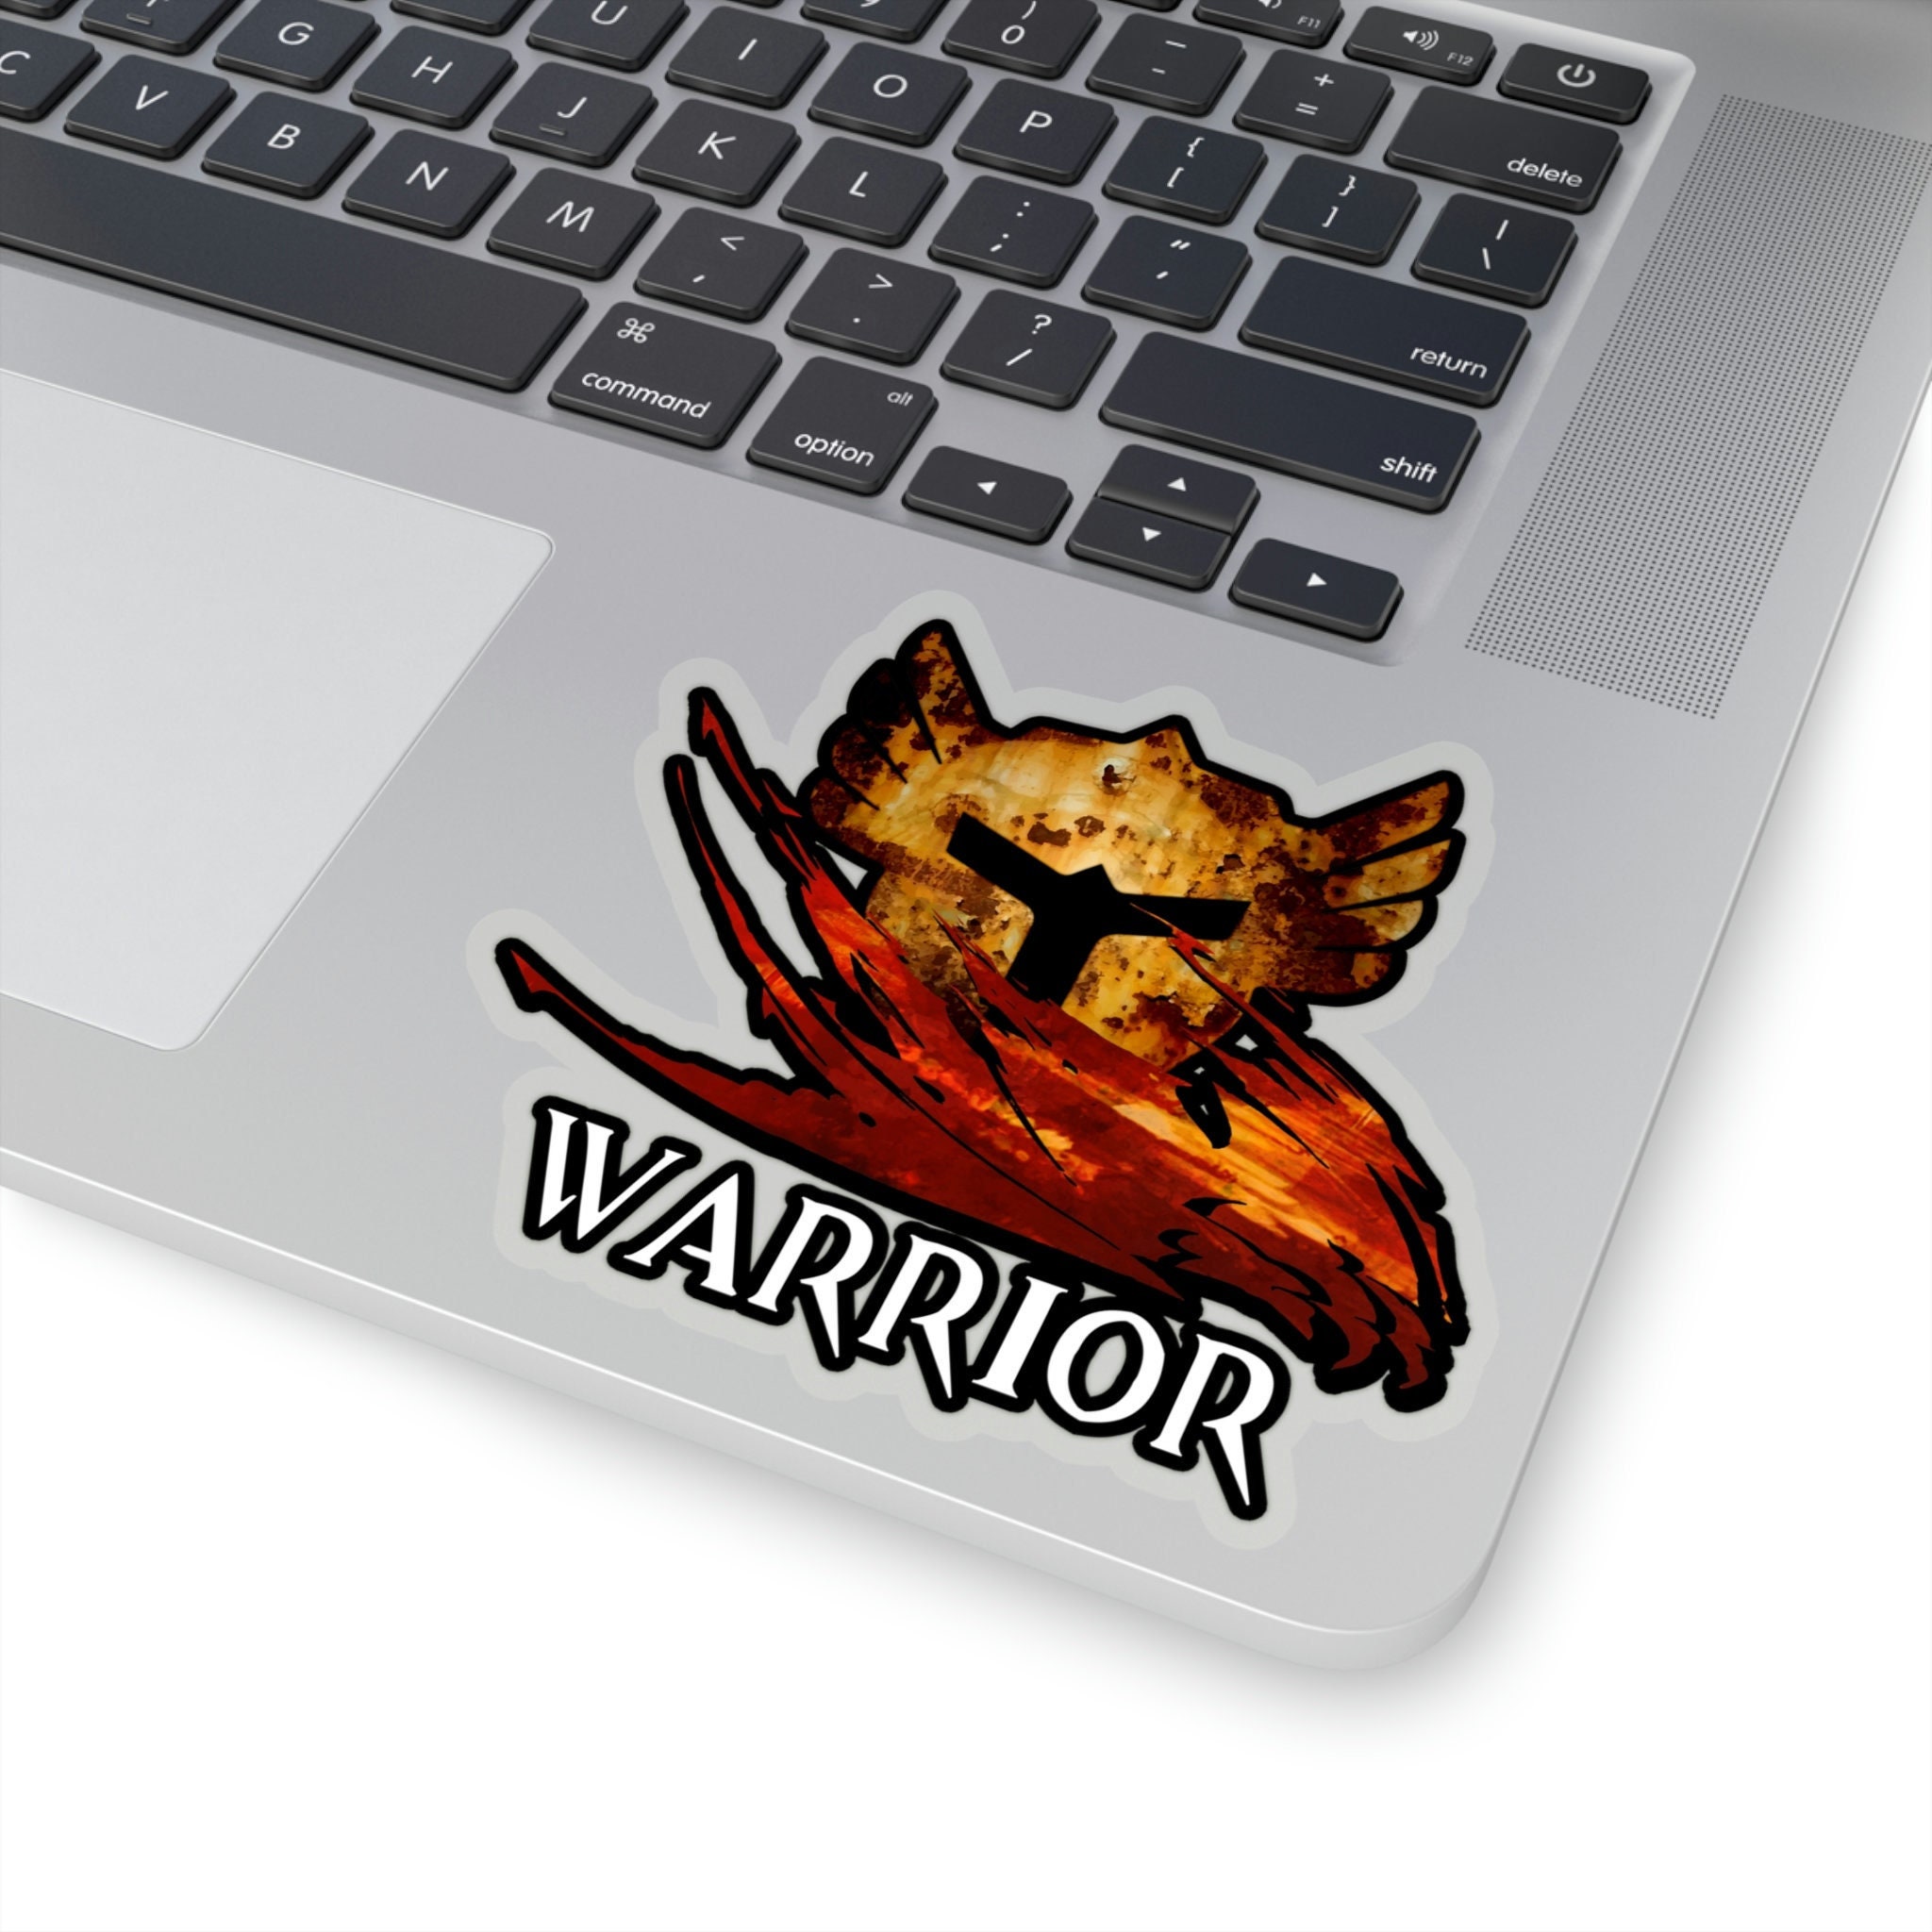 Guild Wars 2 Vinyl Decals 13 to Choose From Stickers for Laptop, Car  Window, and Bumper 